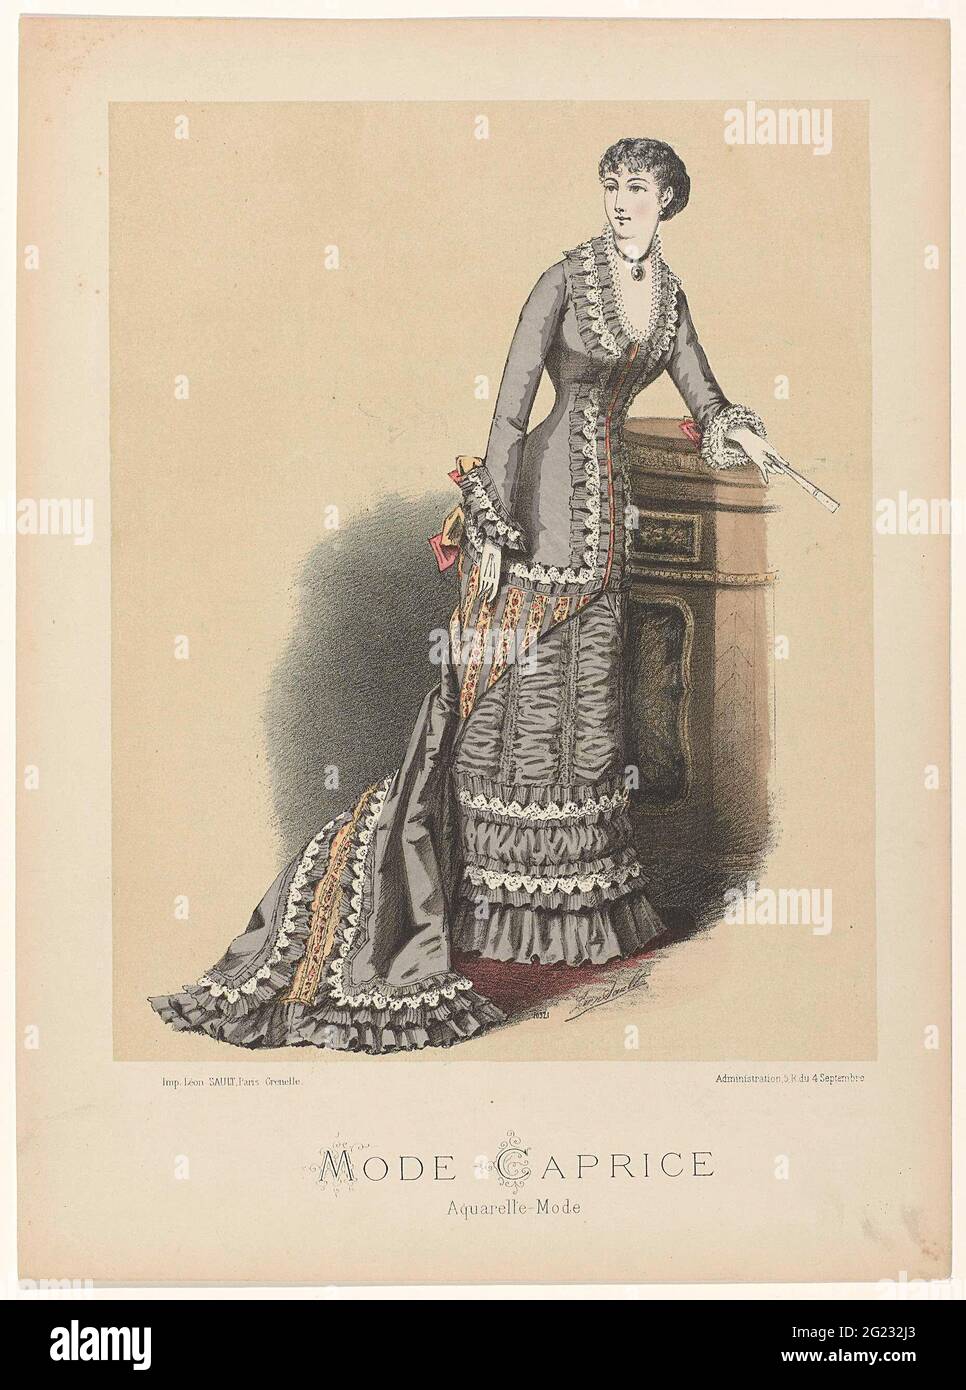 Peregrination lepel opwinding Fashion Caprice, 1886 No. 10321: Aquarelle mode. Woman in a richly  decorated dress with trail. Accessories: necklace with pendant, gloves,  impeller Stock Photo - Alamy